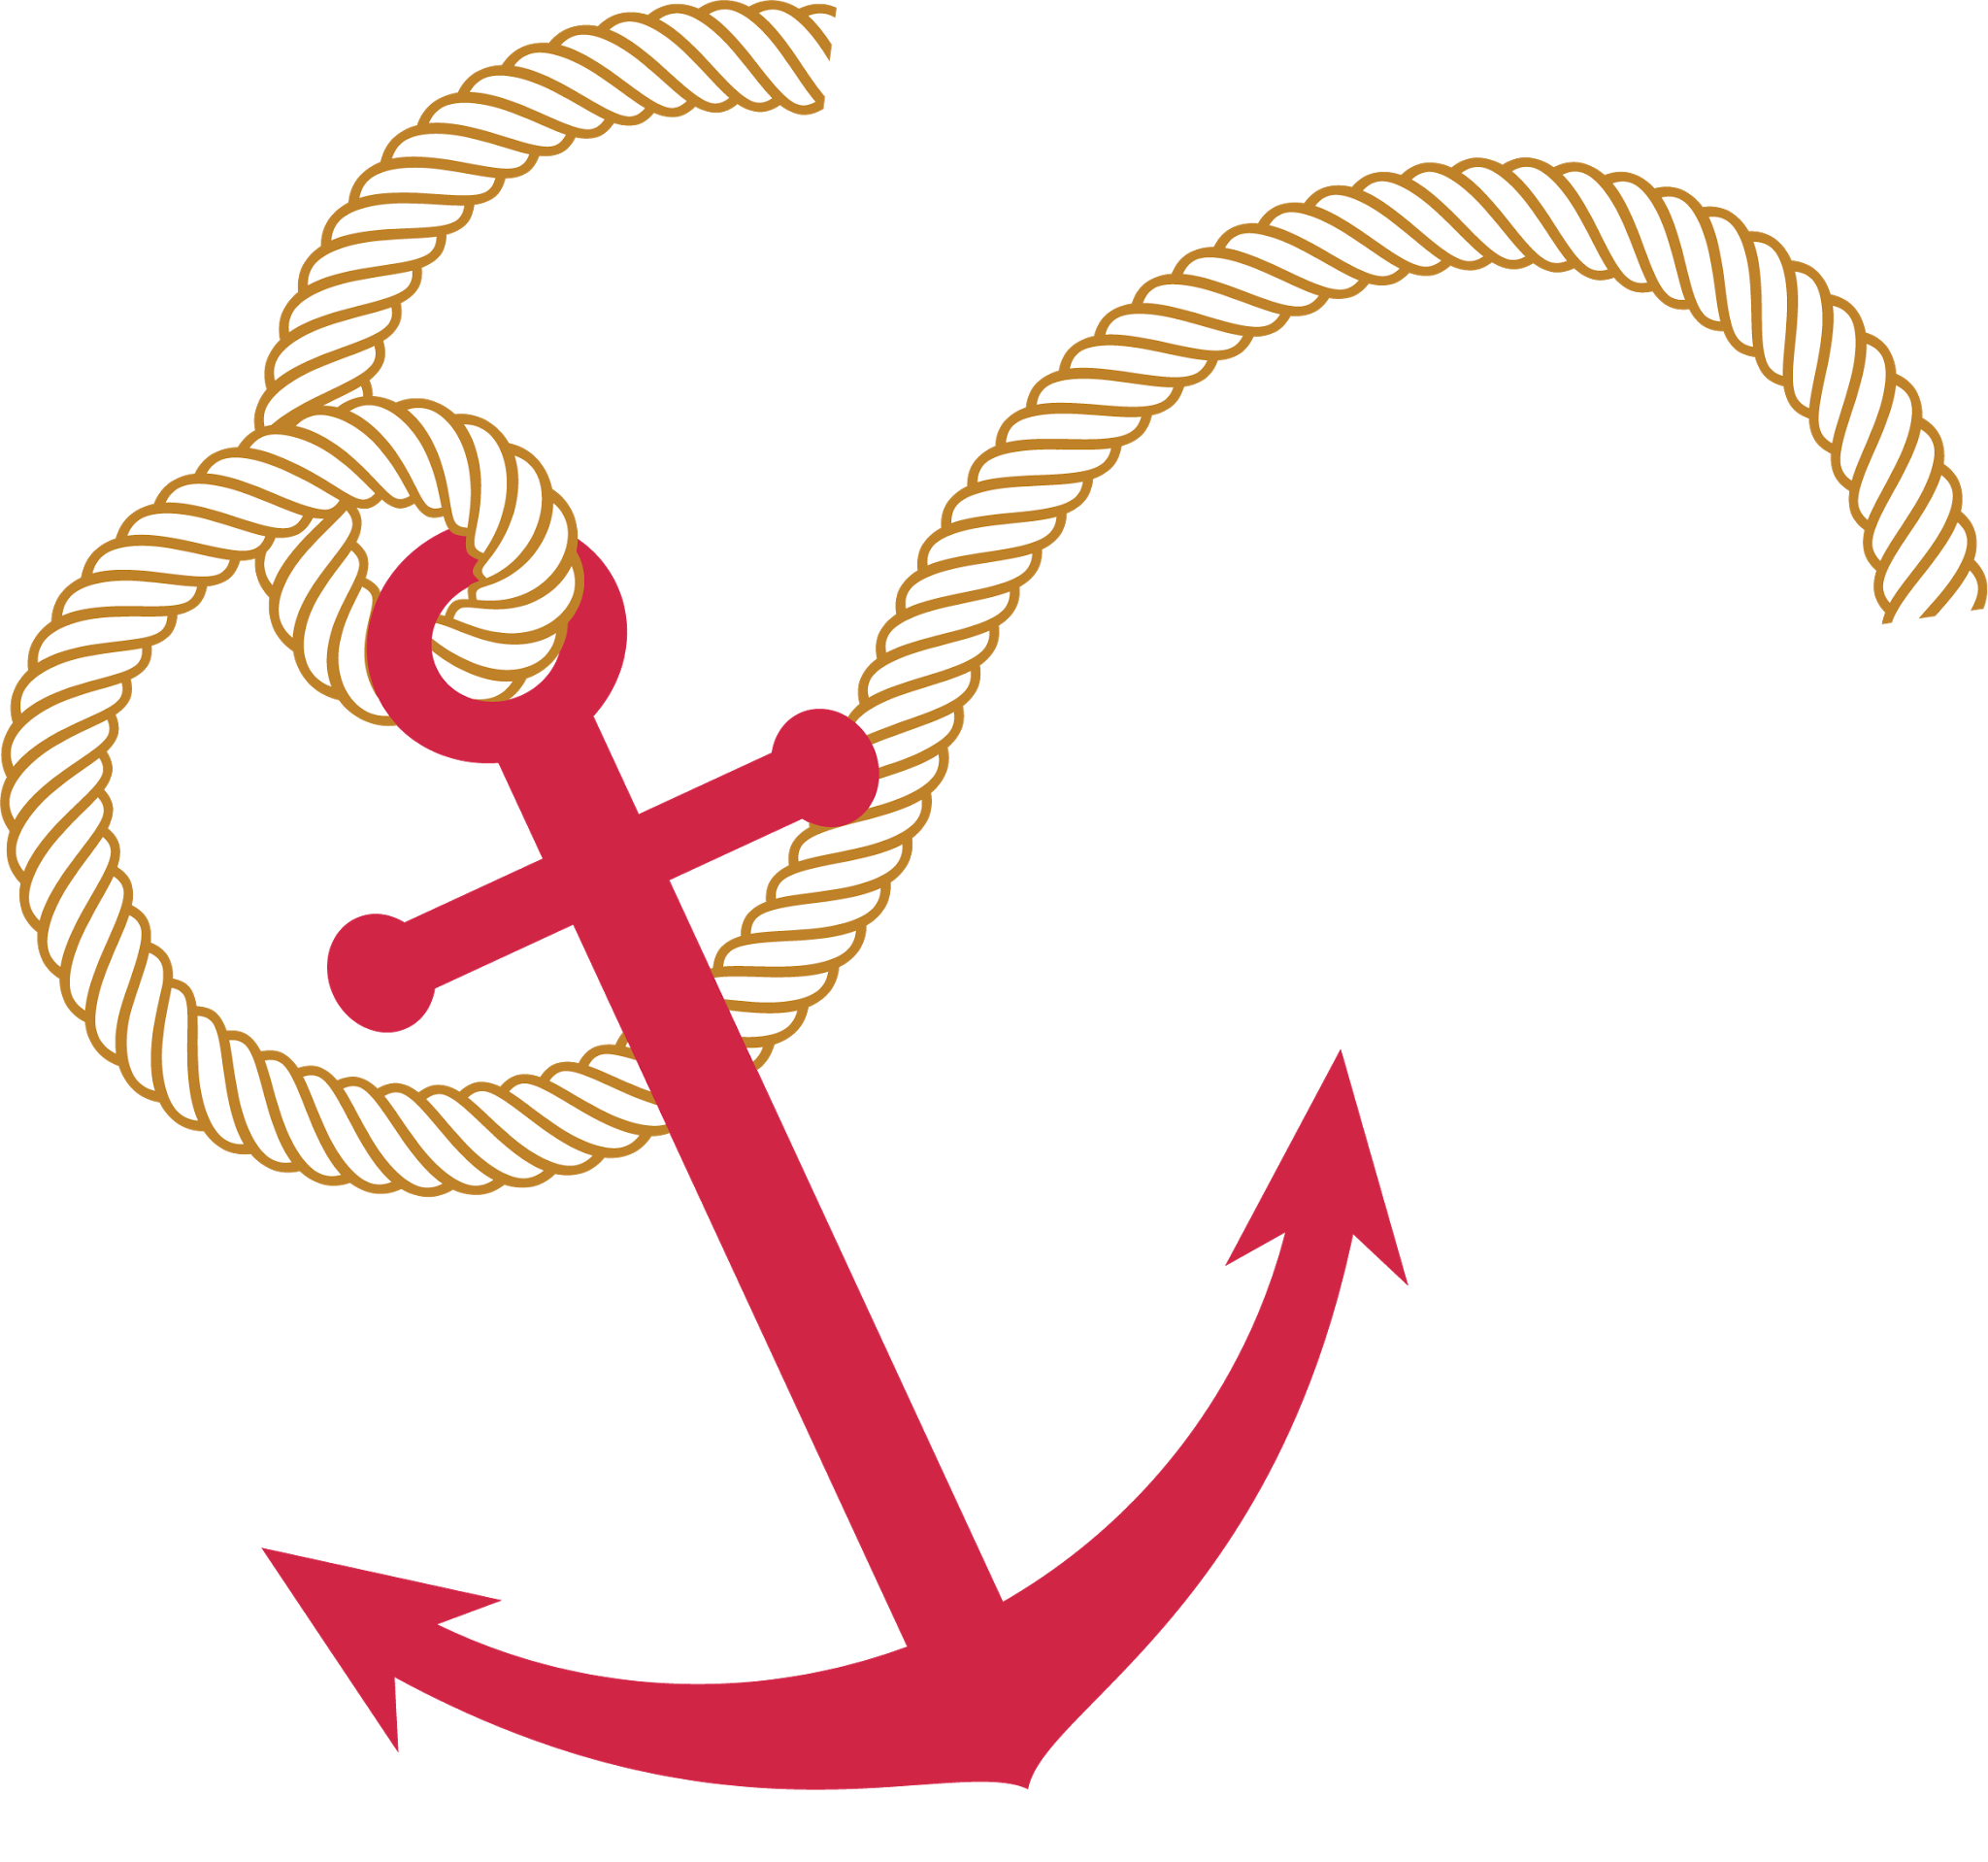 Anchor applications for clothes. Storytime clipart wiggle worm